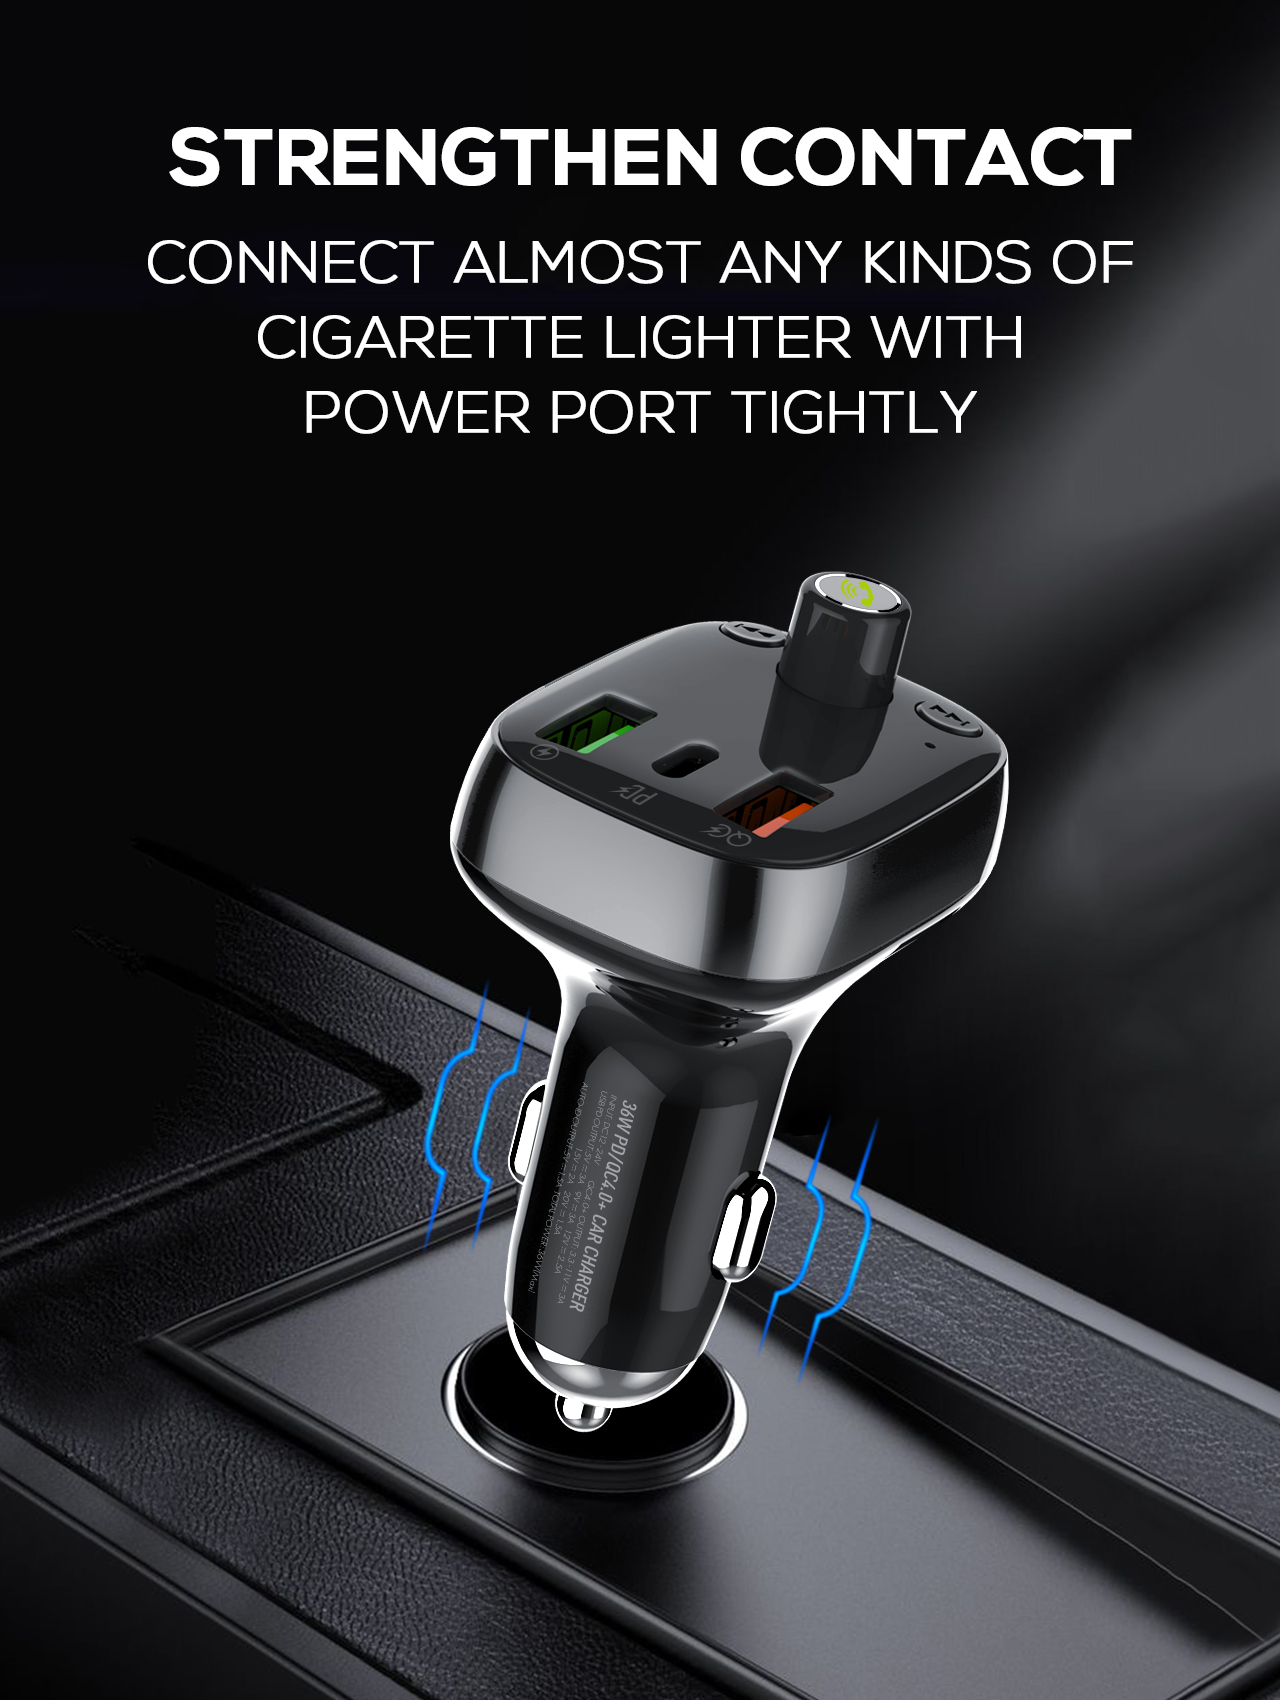 LDNIO-C704Q-USB-Car-Charger-bluetooth-FM-Transmitter-MP3-Player-USB-C-PD-QC4-Fast-Charging-For-iPhon-1741740-9